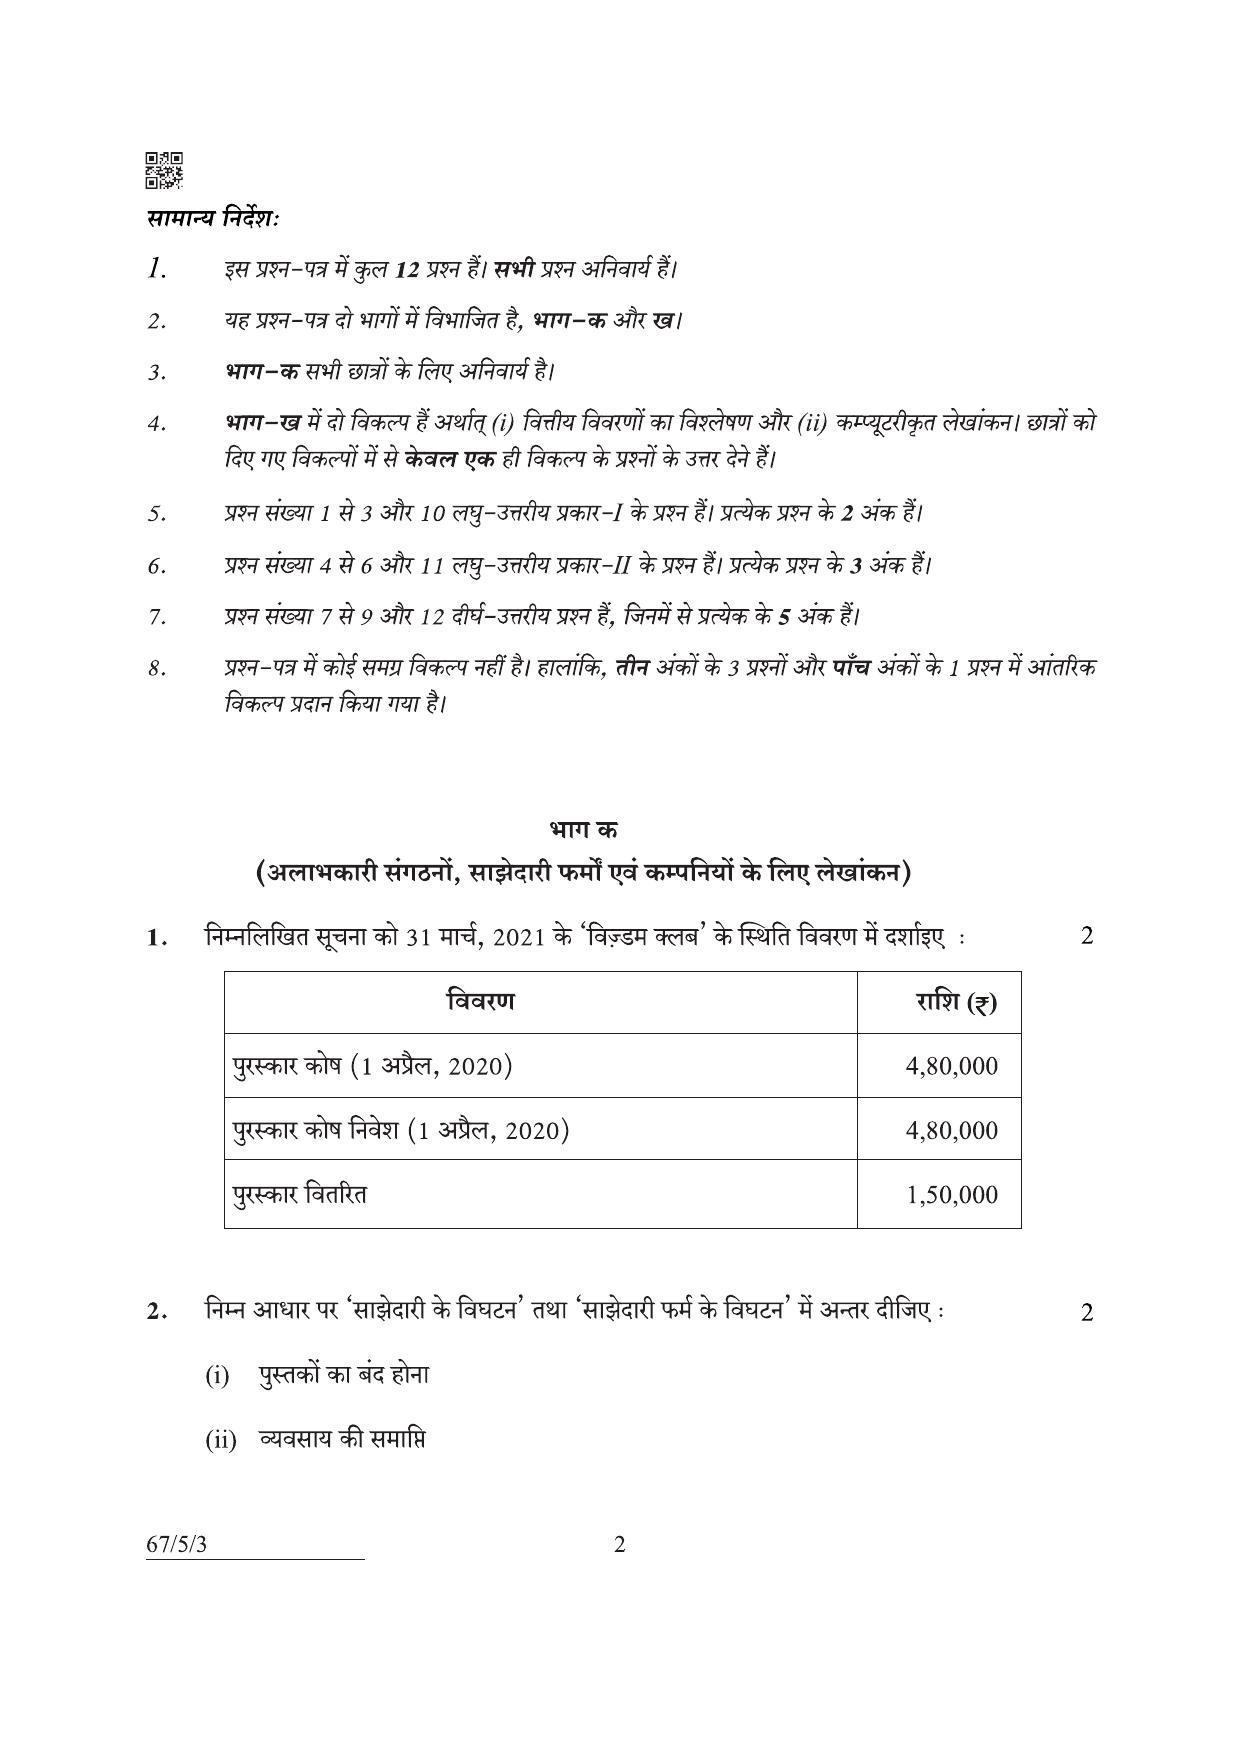 CBSE Class 12 67-5-3 Accountancy 2022 Question Paper - Page 2